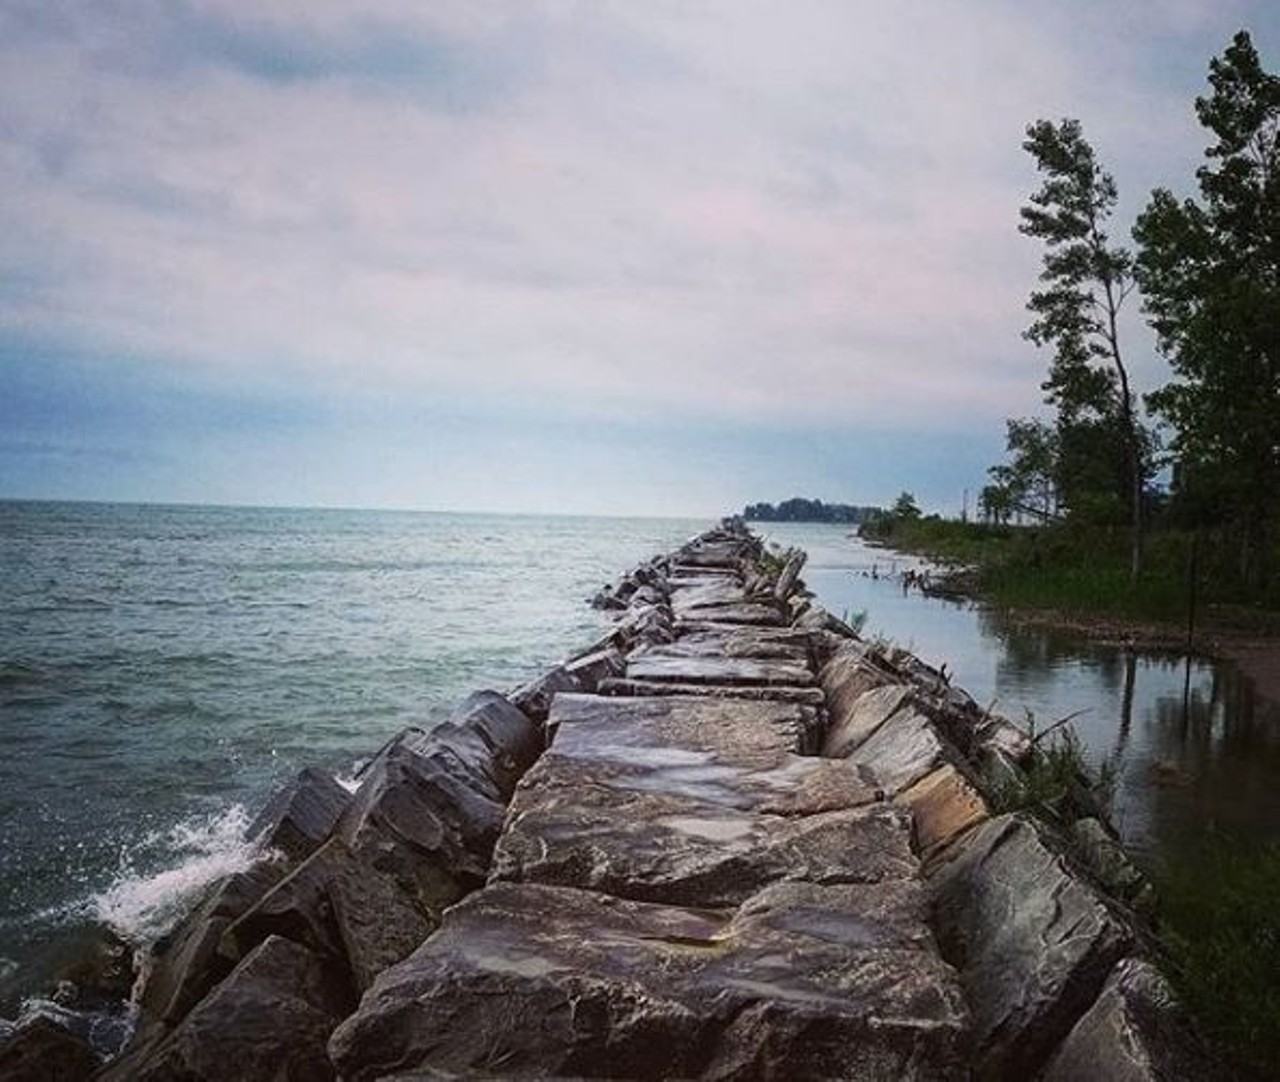  Walnut Beach Park
Walnut Blvd. & Lake Ave., Ashtabula
This park is 28 acres of natural wonder and fun, an the long, foot-friendly sandy beach is just begging for you to come explore. 
Photo via ericnfortune/Instagram